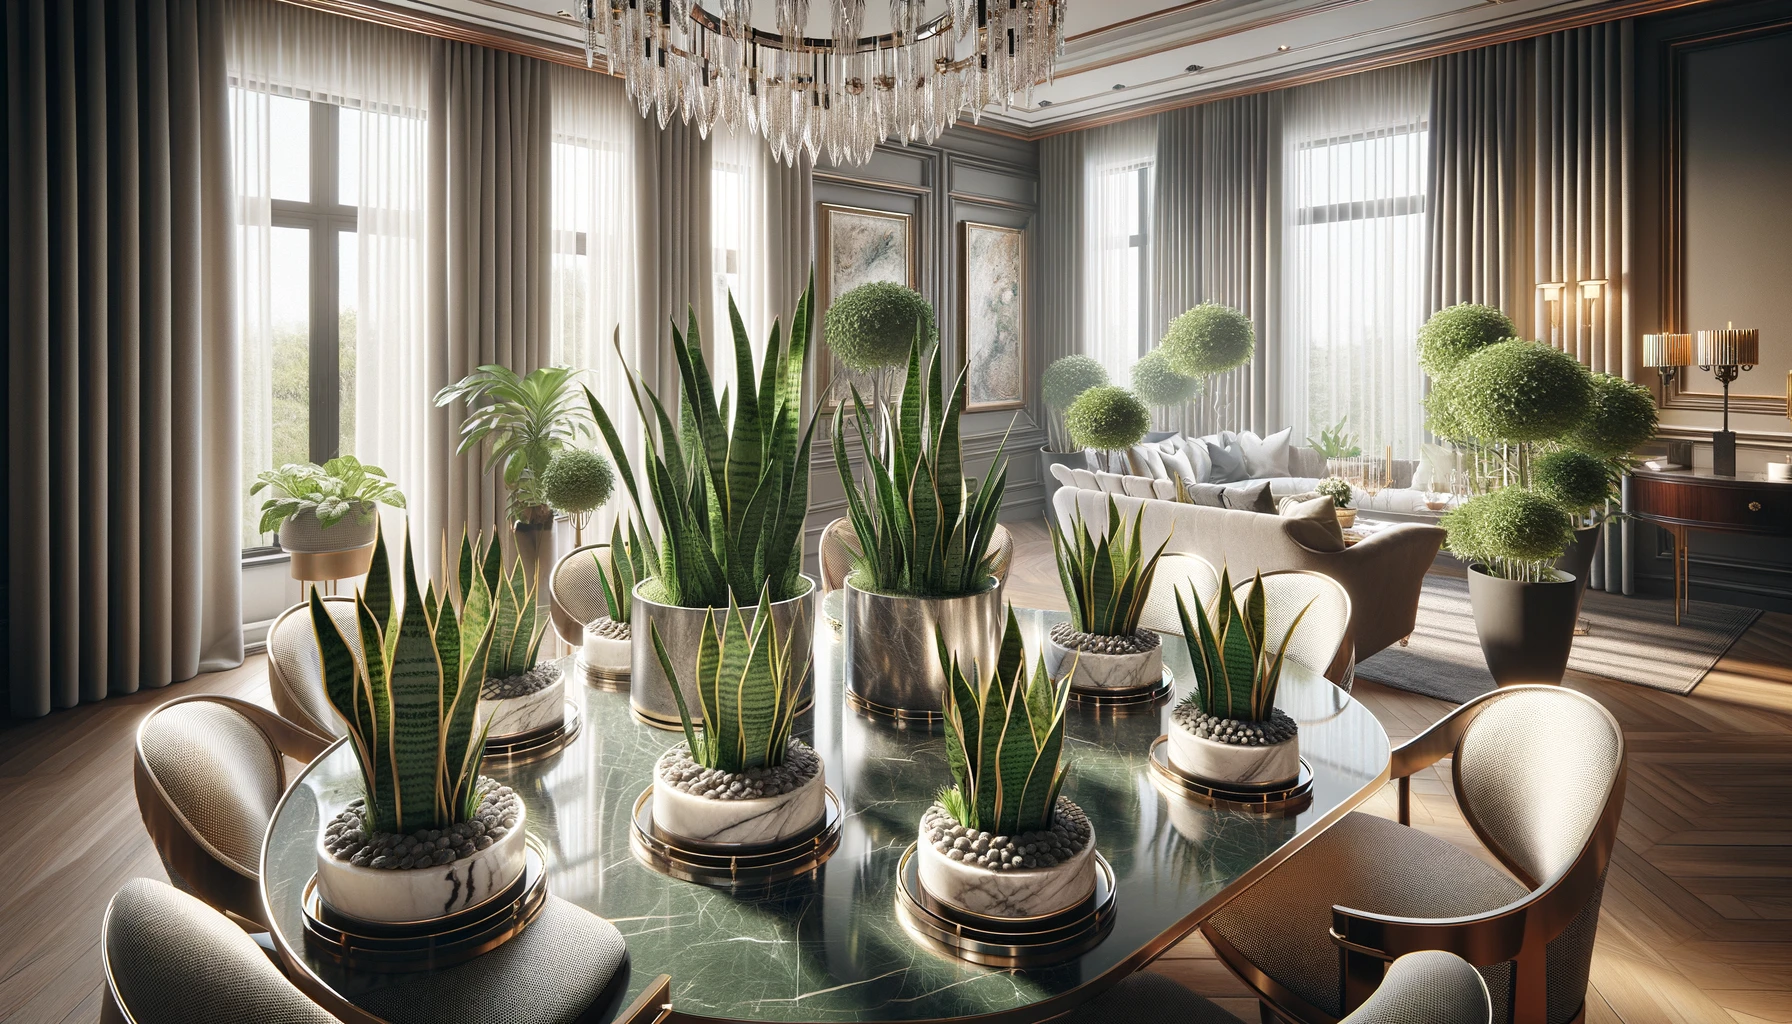 Hyper-realistic image of succulent snake plants in luxurious metal and marble pots, enhancing a sophisticated dining room. The setting includes an elegant glass dining table, plush chairs, and warm lighting that invites a cozy atmosphere. Large draped windows and tasteful artwork contribute to the refined decor, with the lush green snake plants adding vibrancy and a touch of nature to the space